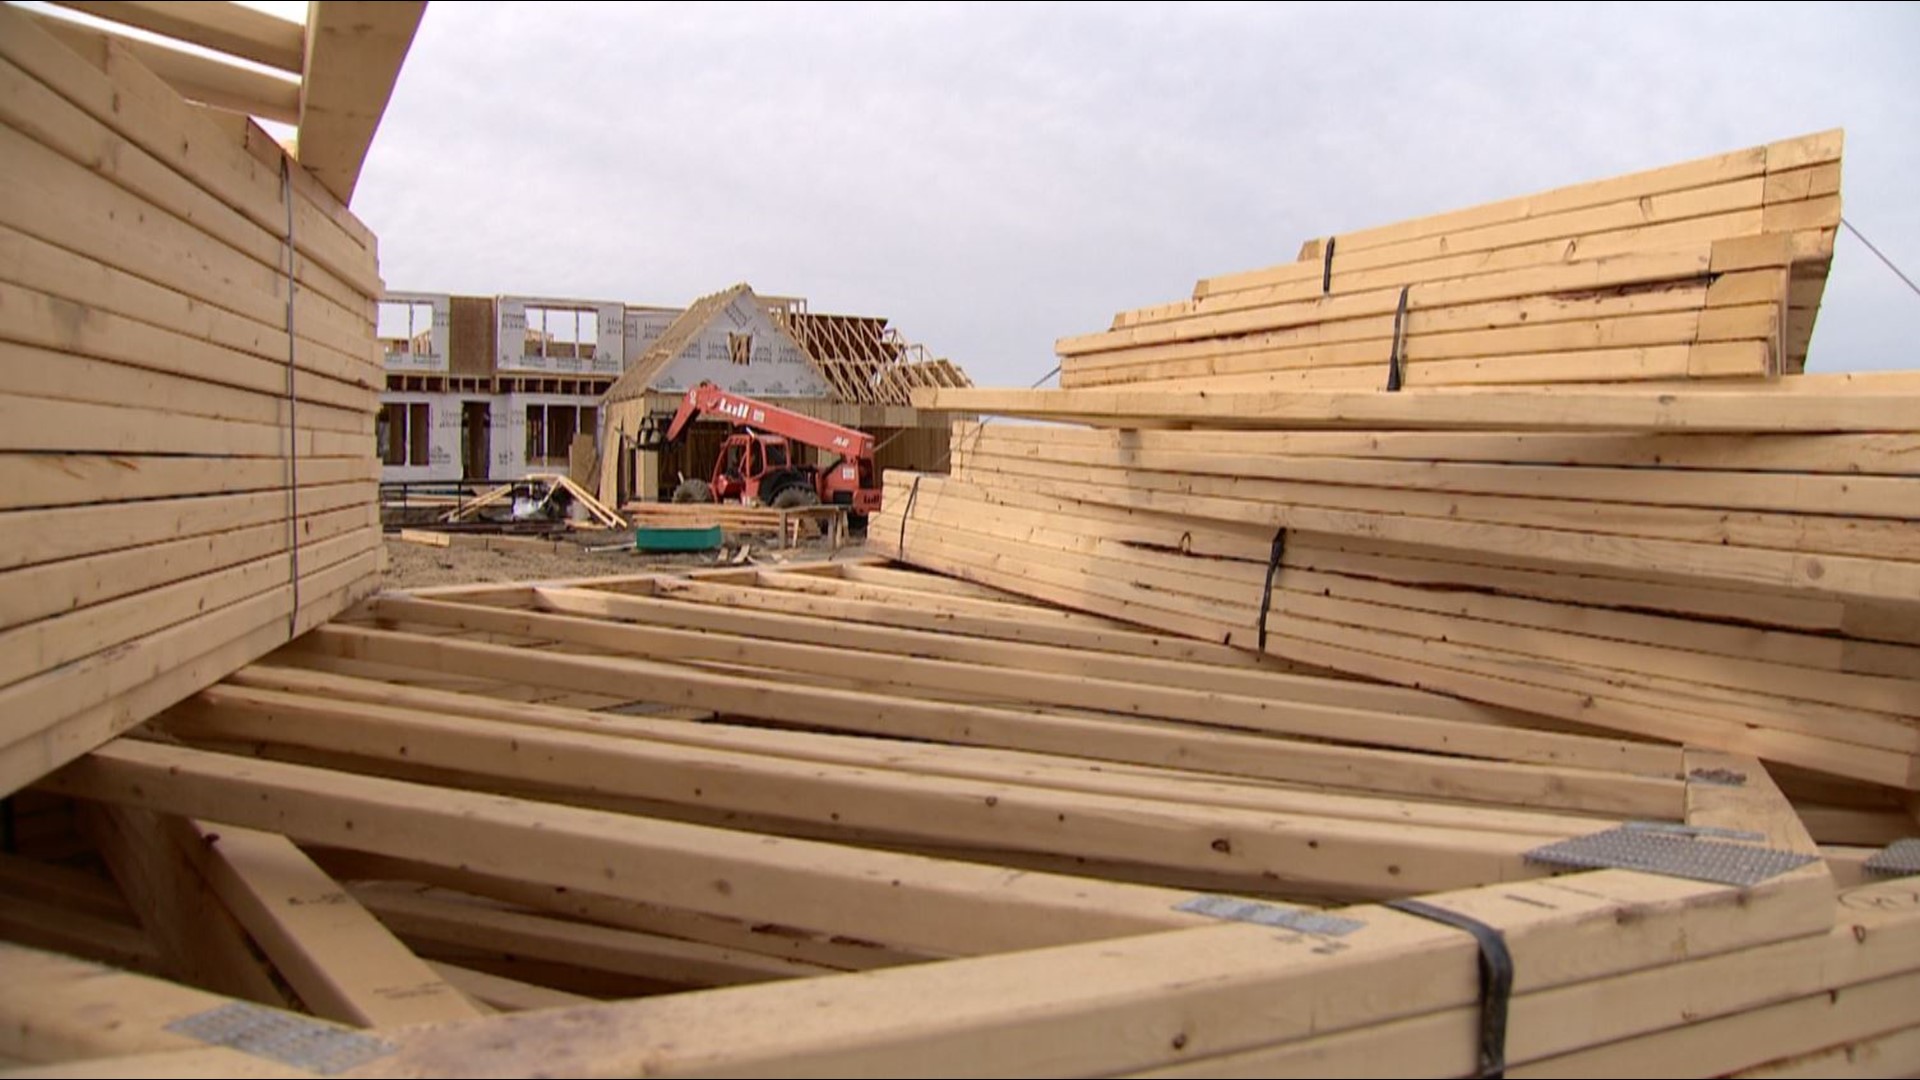 Some building materials have tripled in price since last spring.